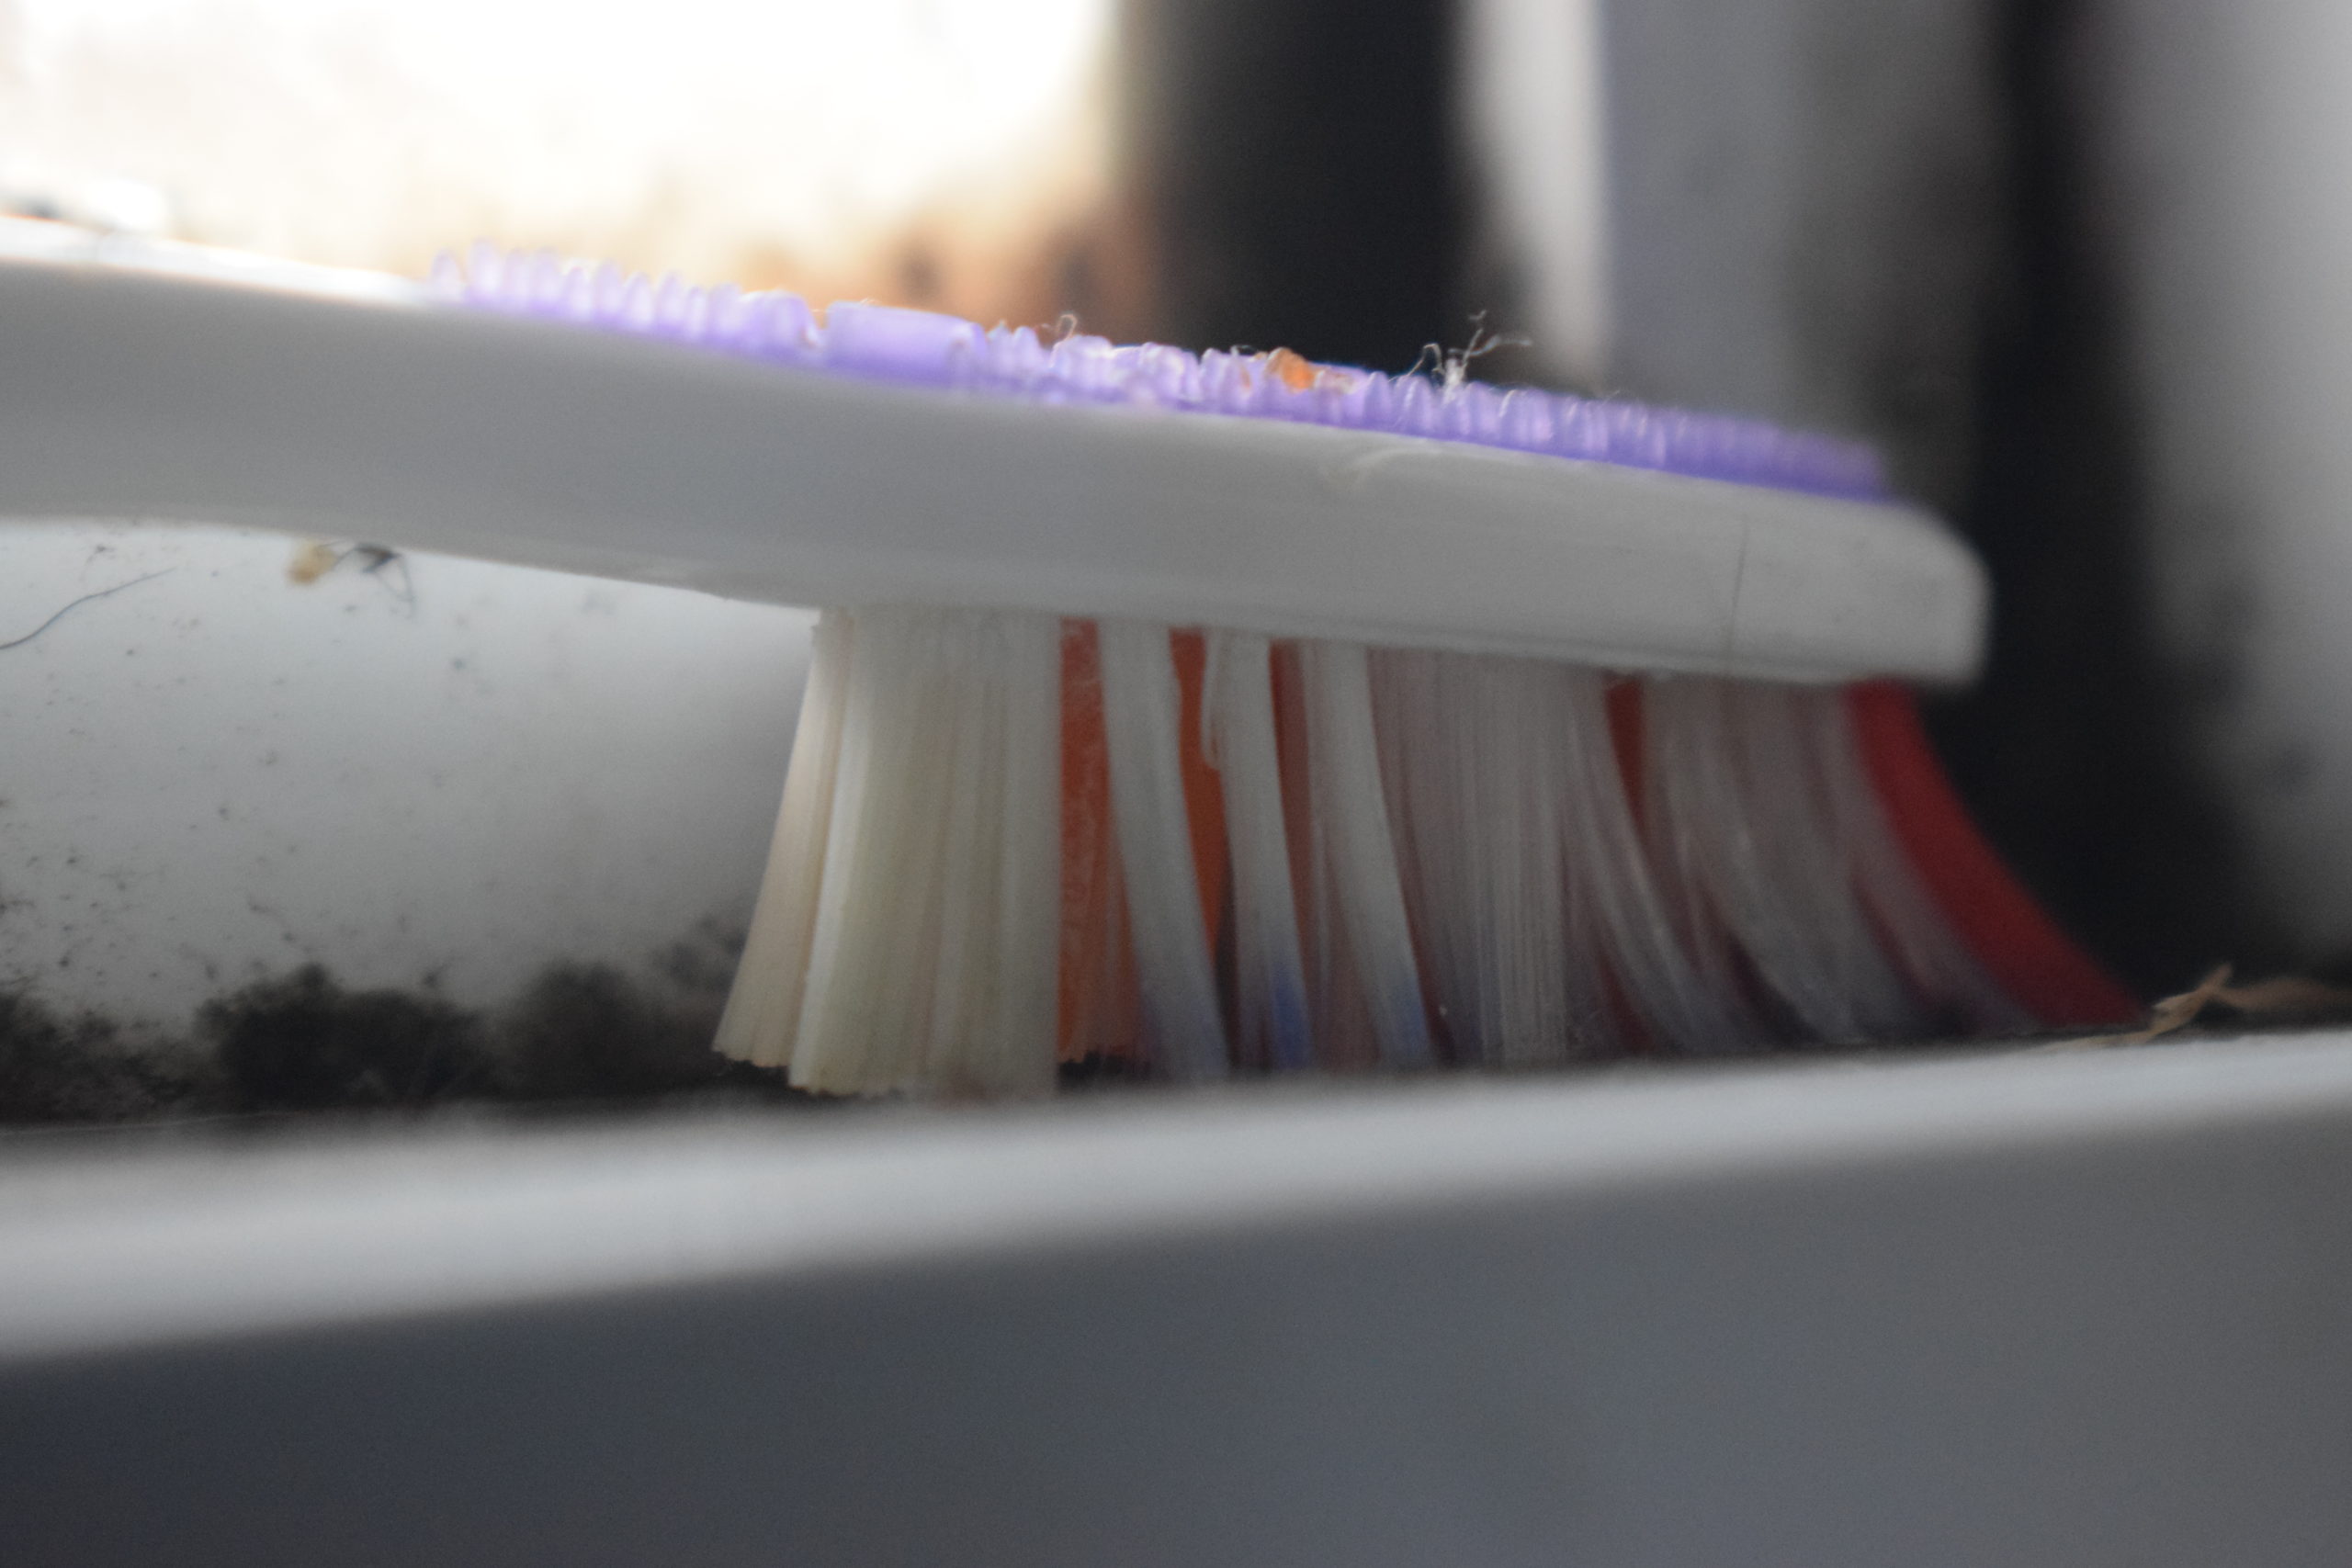 Toothbrush bristles cleaning window track